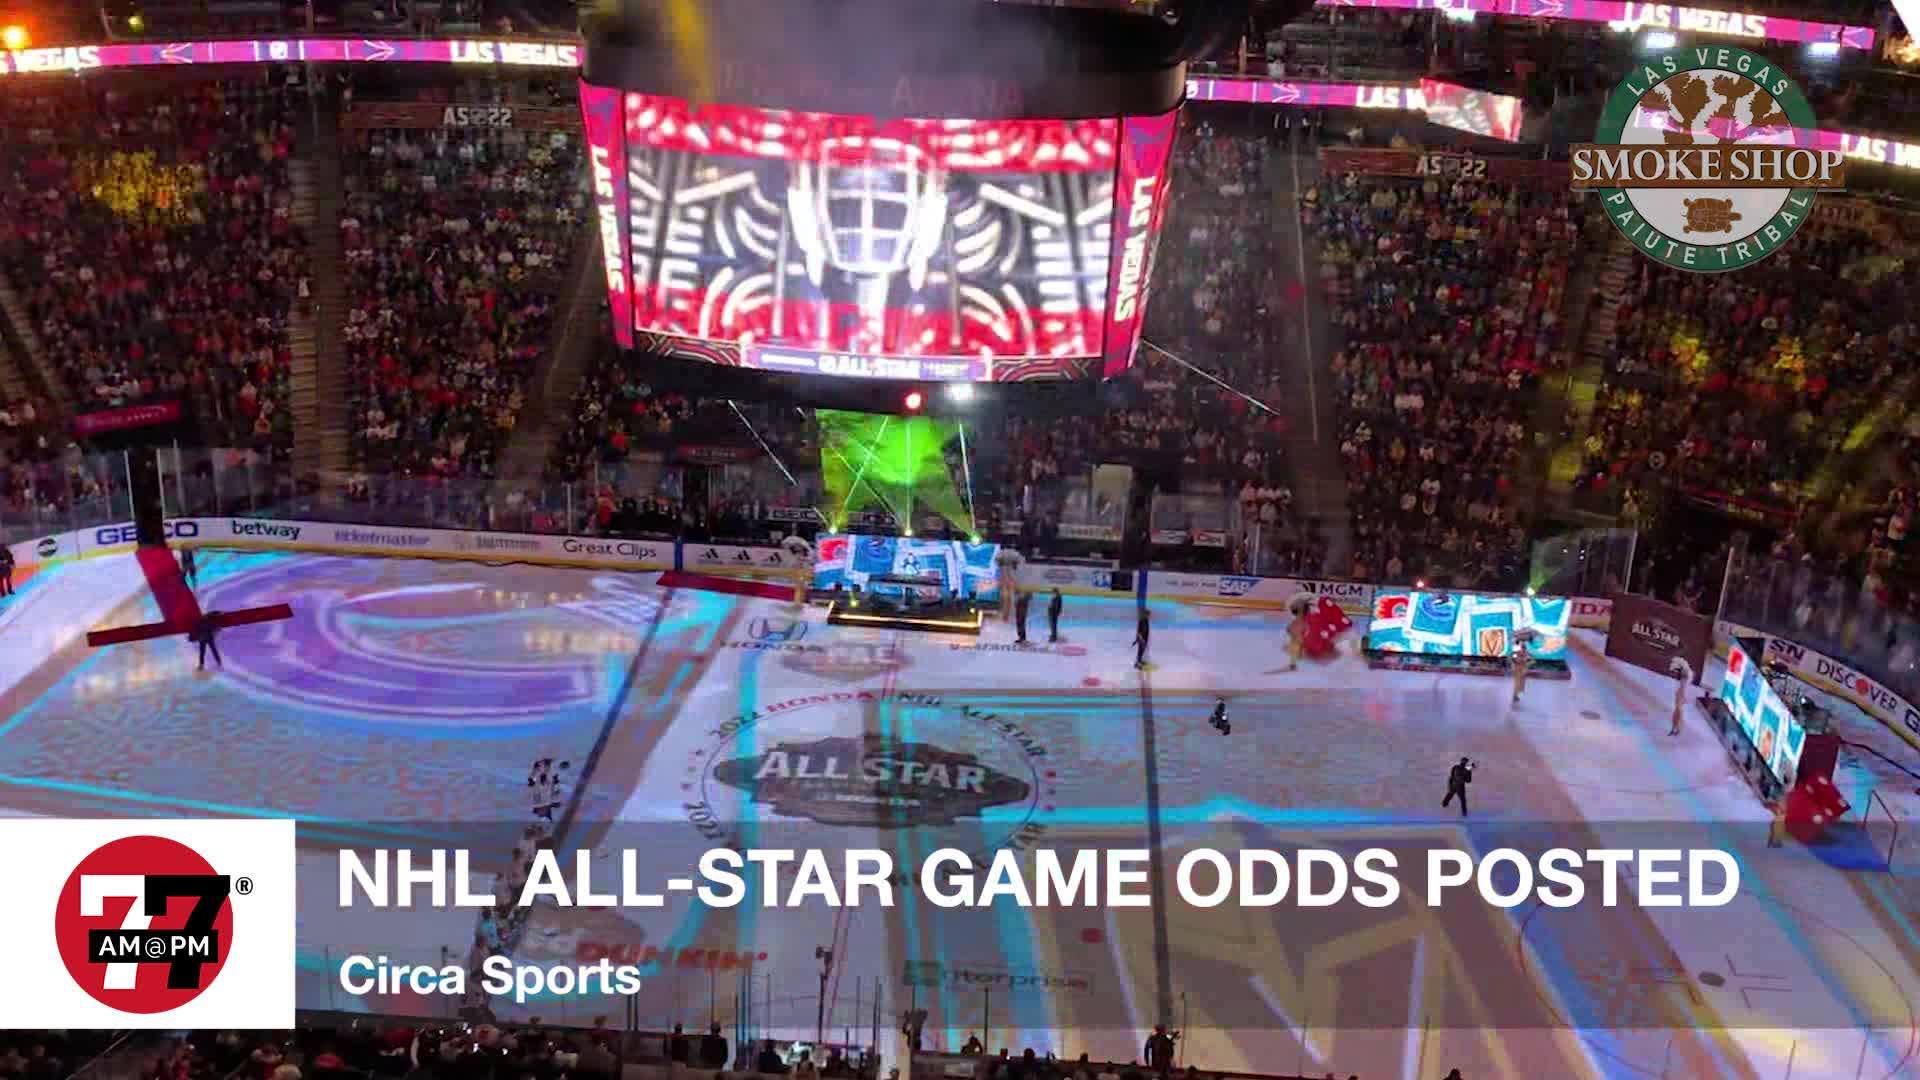 NHL All-Star game odds